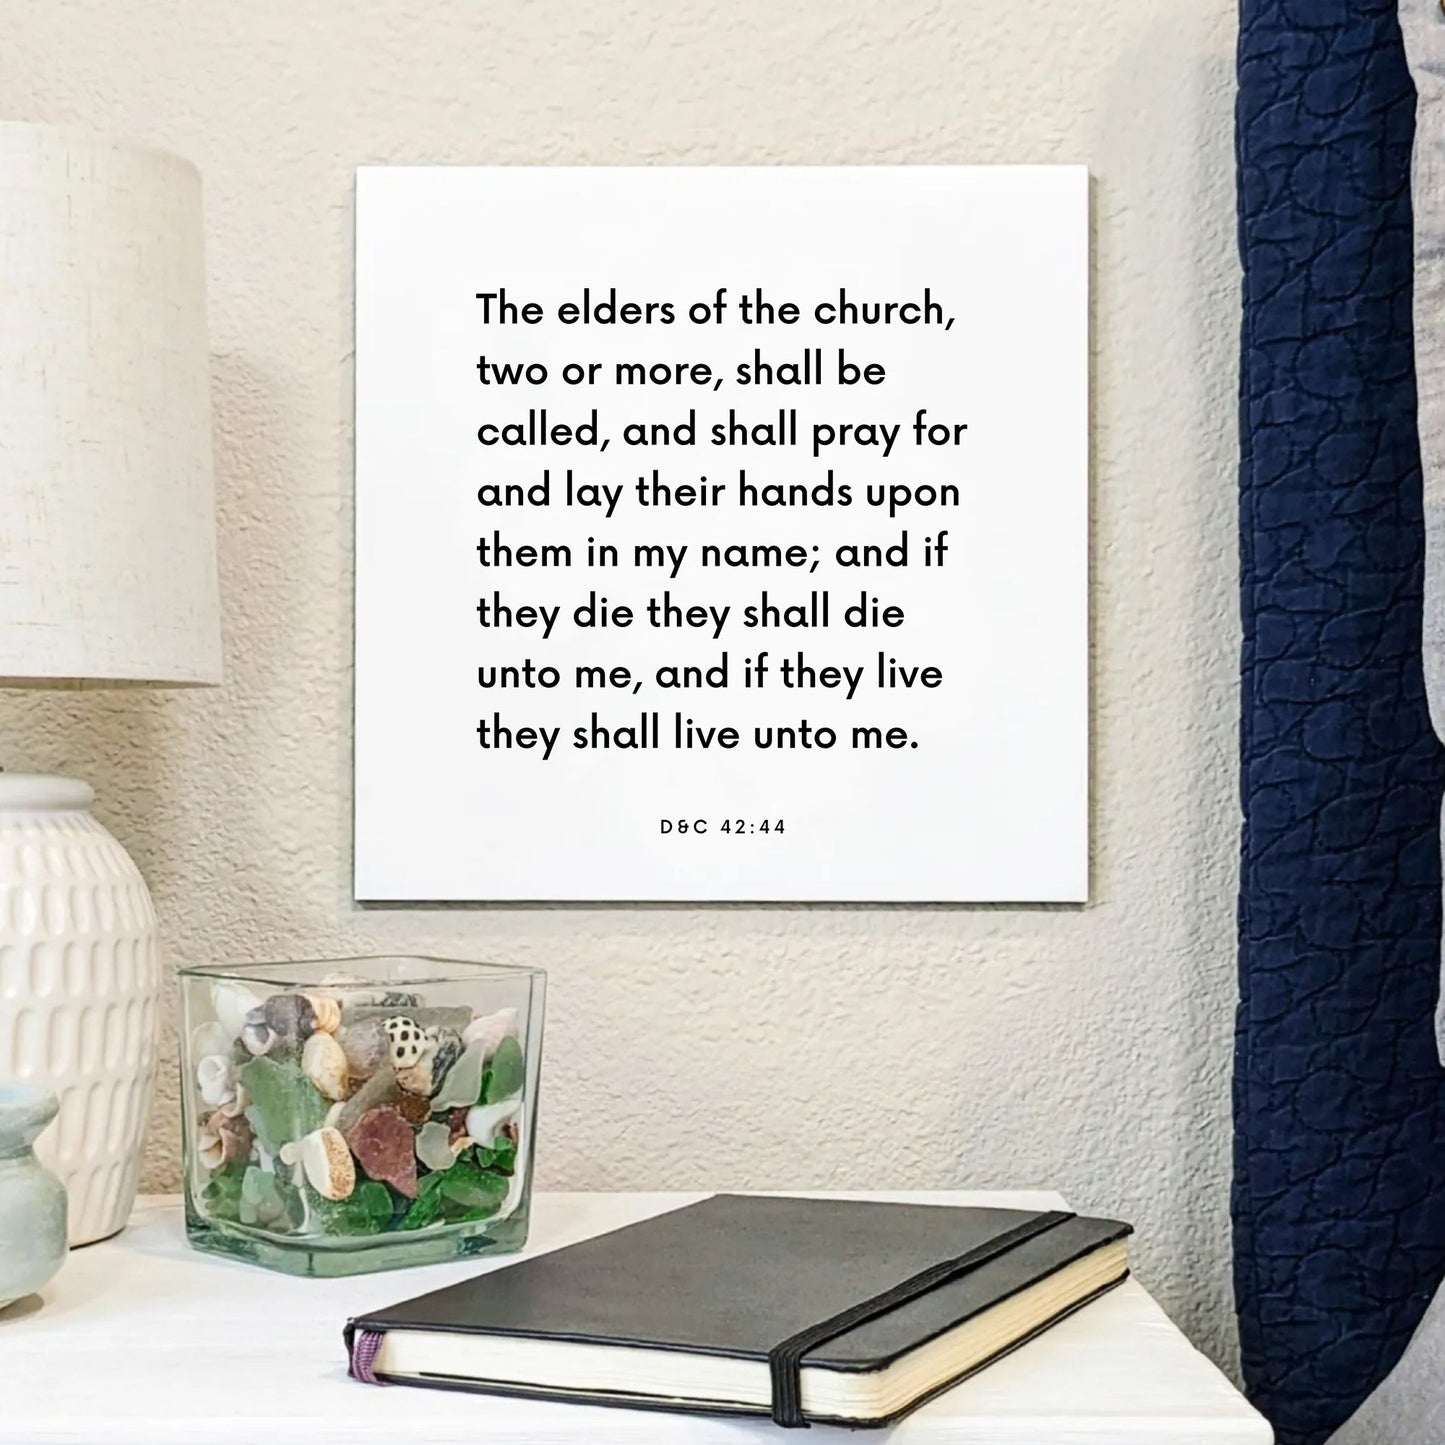 Bedside mouting of the scripture tile for D&C 42:44 - "The elders of the church shall lay their hands upon them"